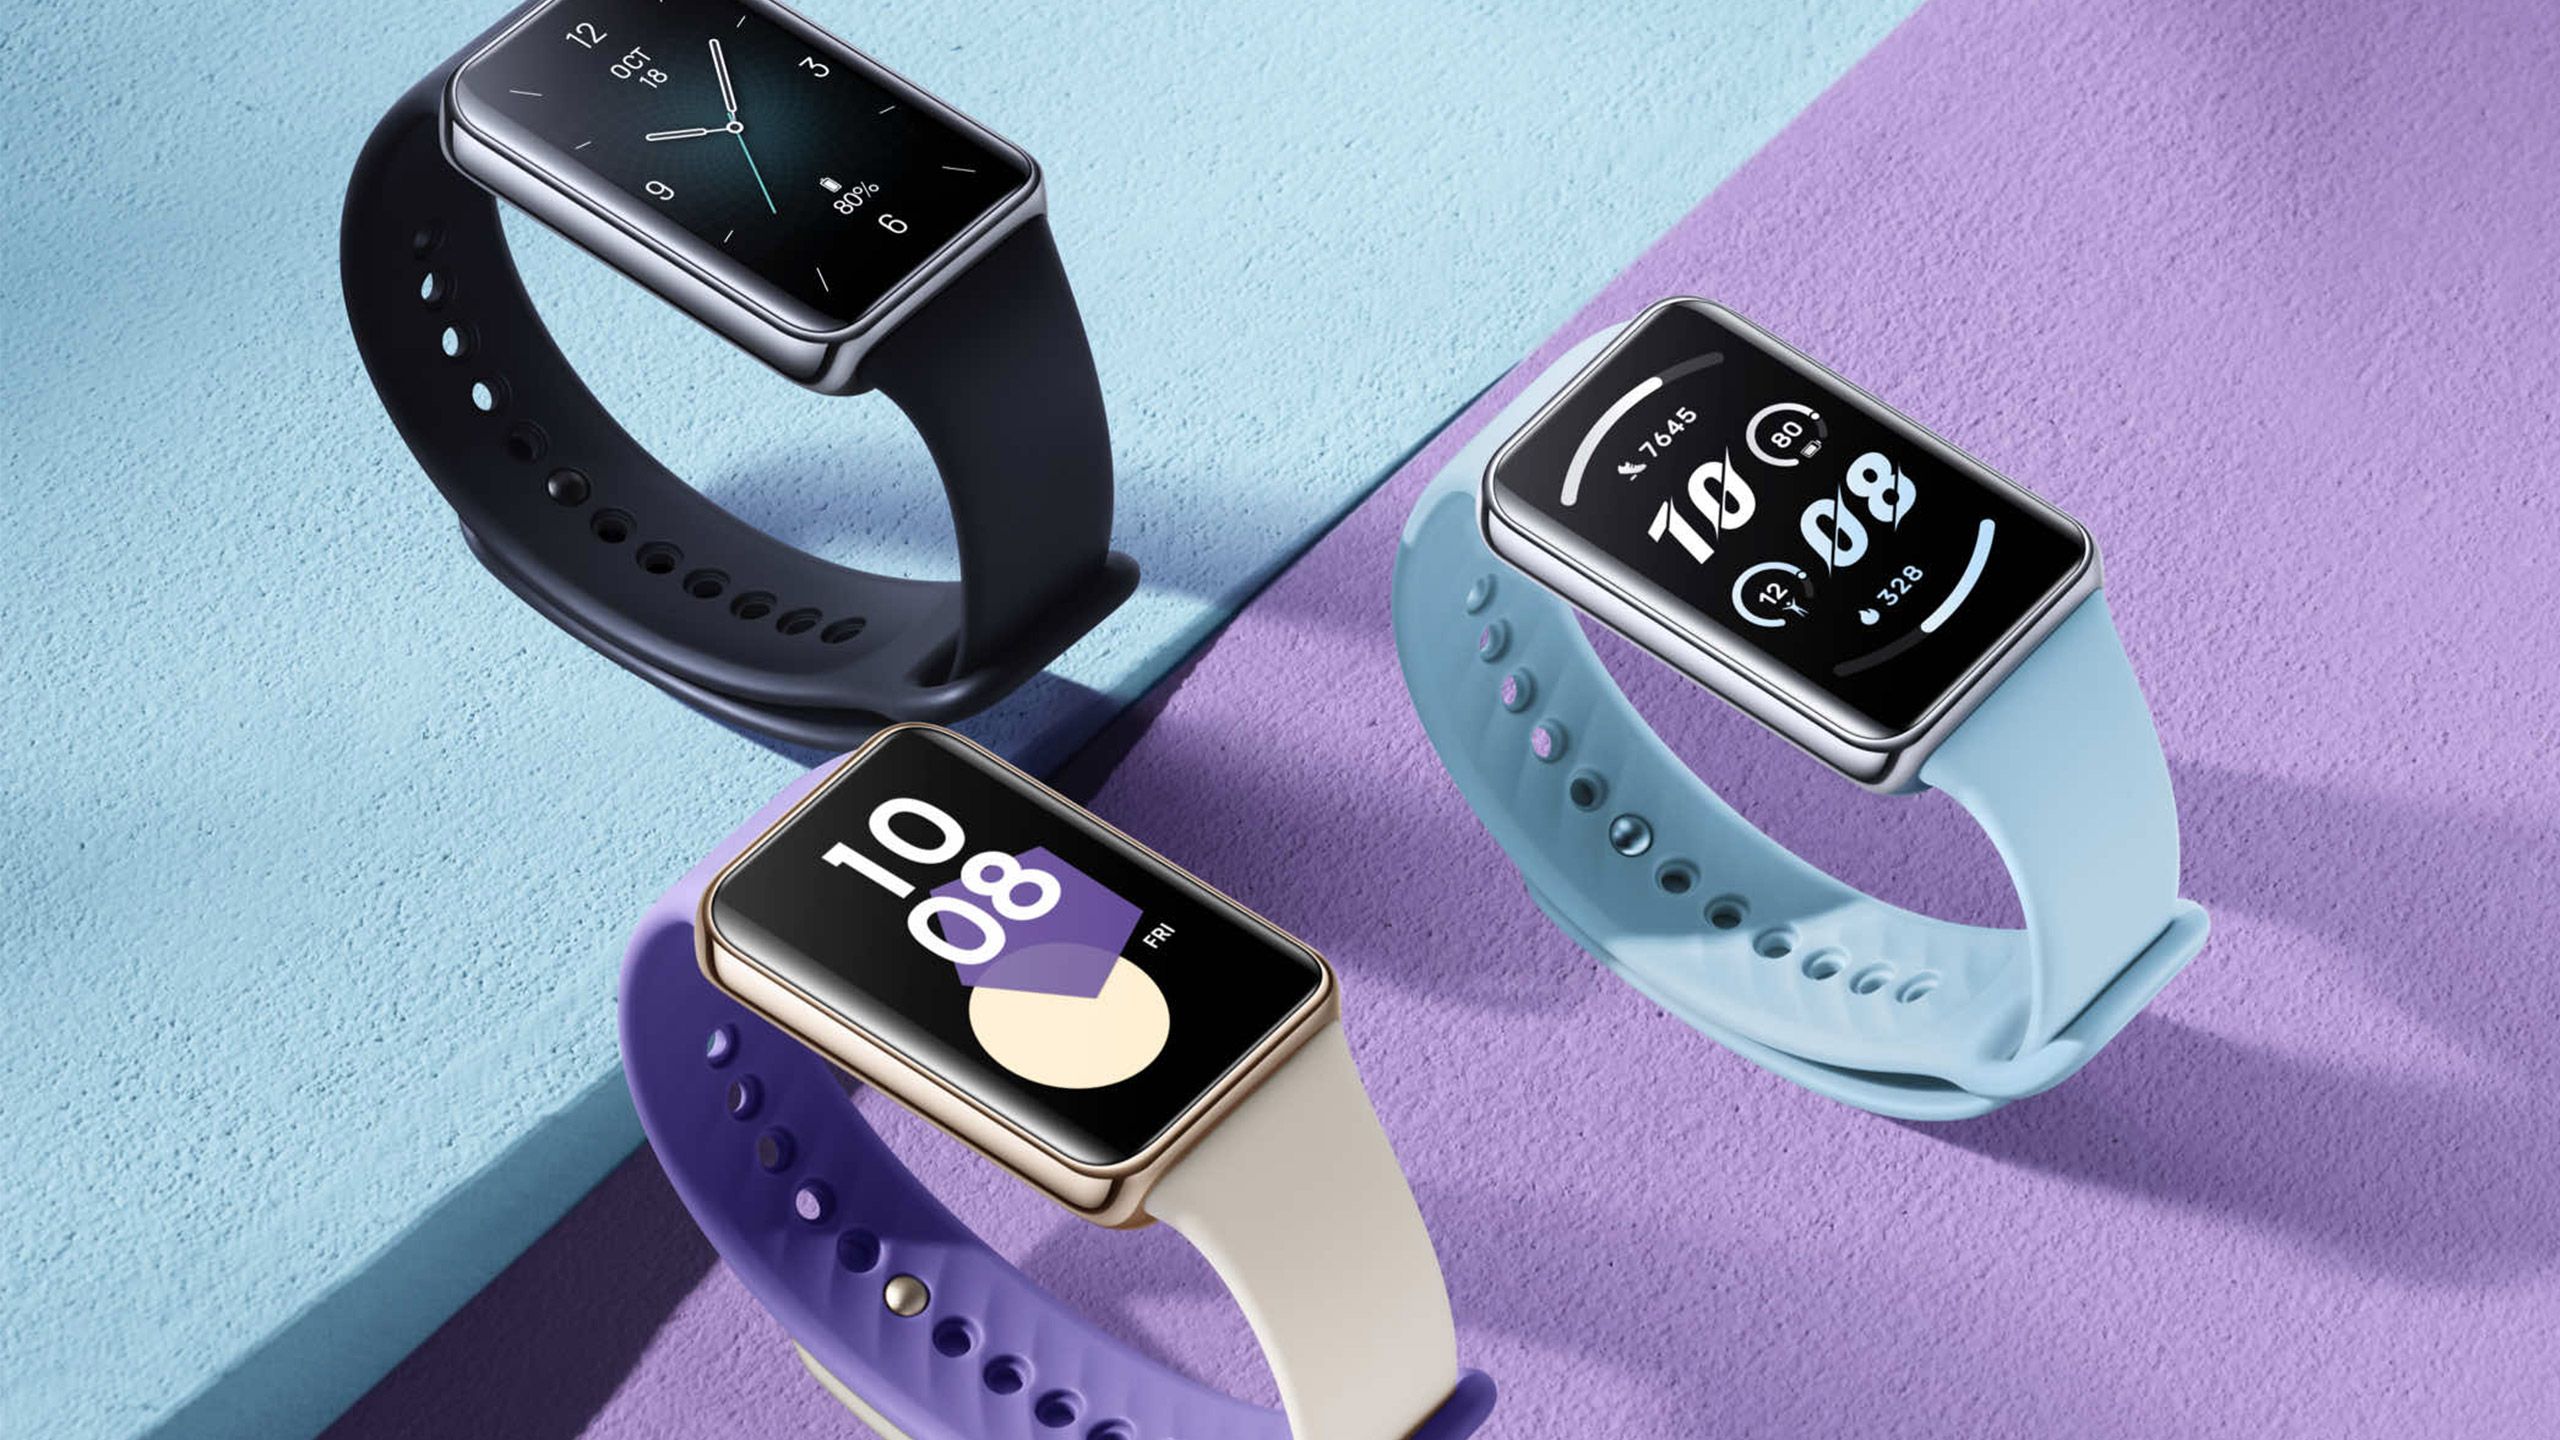 The Honor Band 9 is available in three colors: Black, Purple and Blue